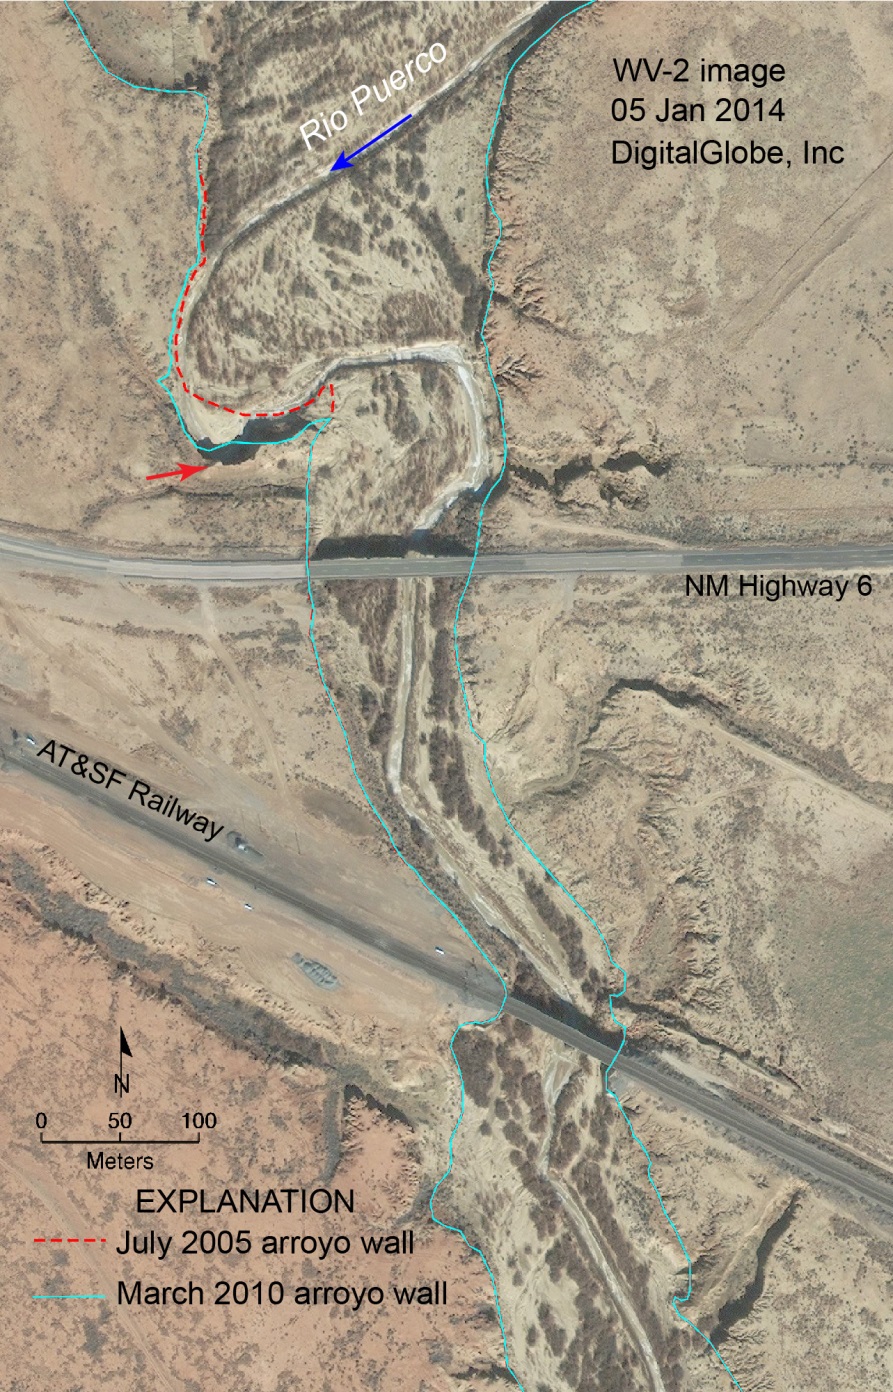 Rio Puerco arroyo wall locations mapped from 2005 imagery (red dashed line) and a 2010 lidar DTM (light blue line) overlaid on a WorldView-2 image acquired shortly after the September 2013 flood, on January 5, 2014 (DigitalGlobe, Inc.). The New Mexico Highway 6 crossing was the downstream limit of the sprayed reach. The northern limit of the untreated reach used for comparison of flood effects is the AT&SF Railway bridge. The red arrow points to a location where valley-fill sediment in the 10.6-m-high arroyo wall eroded another 13 m south toward the highway between March 2010 and January 2014.